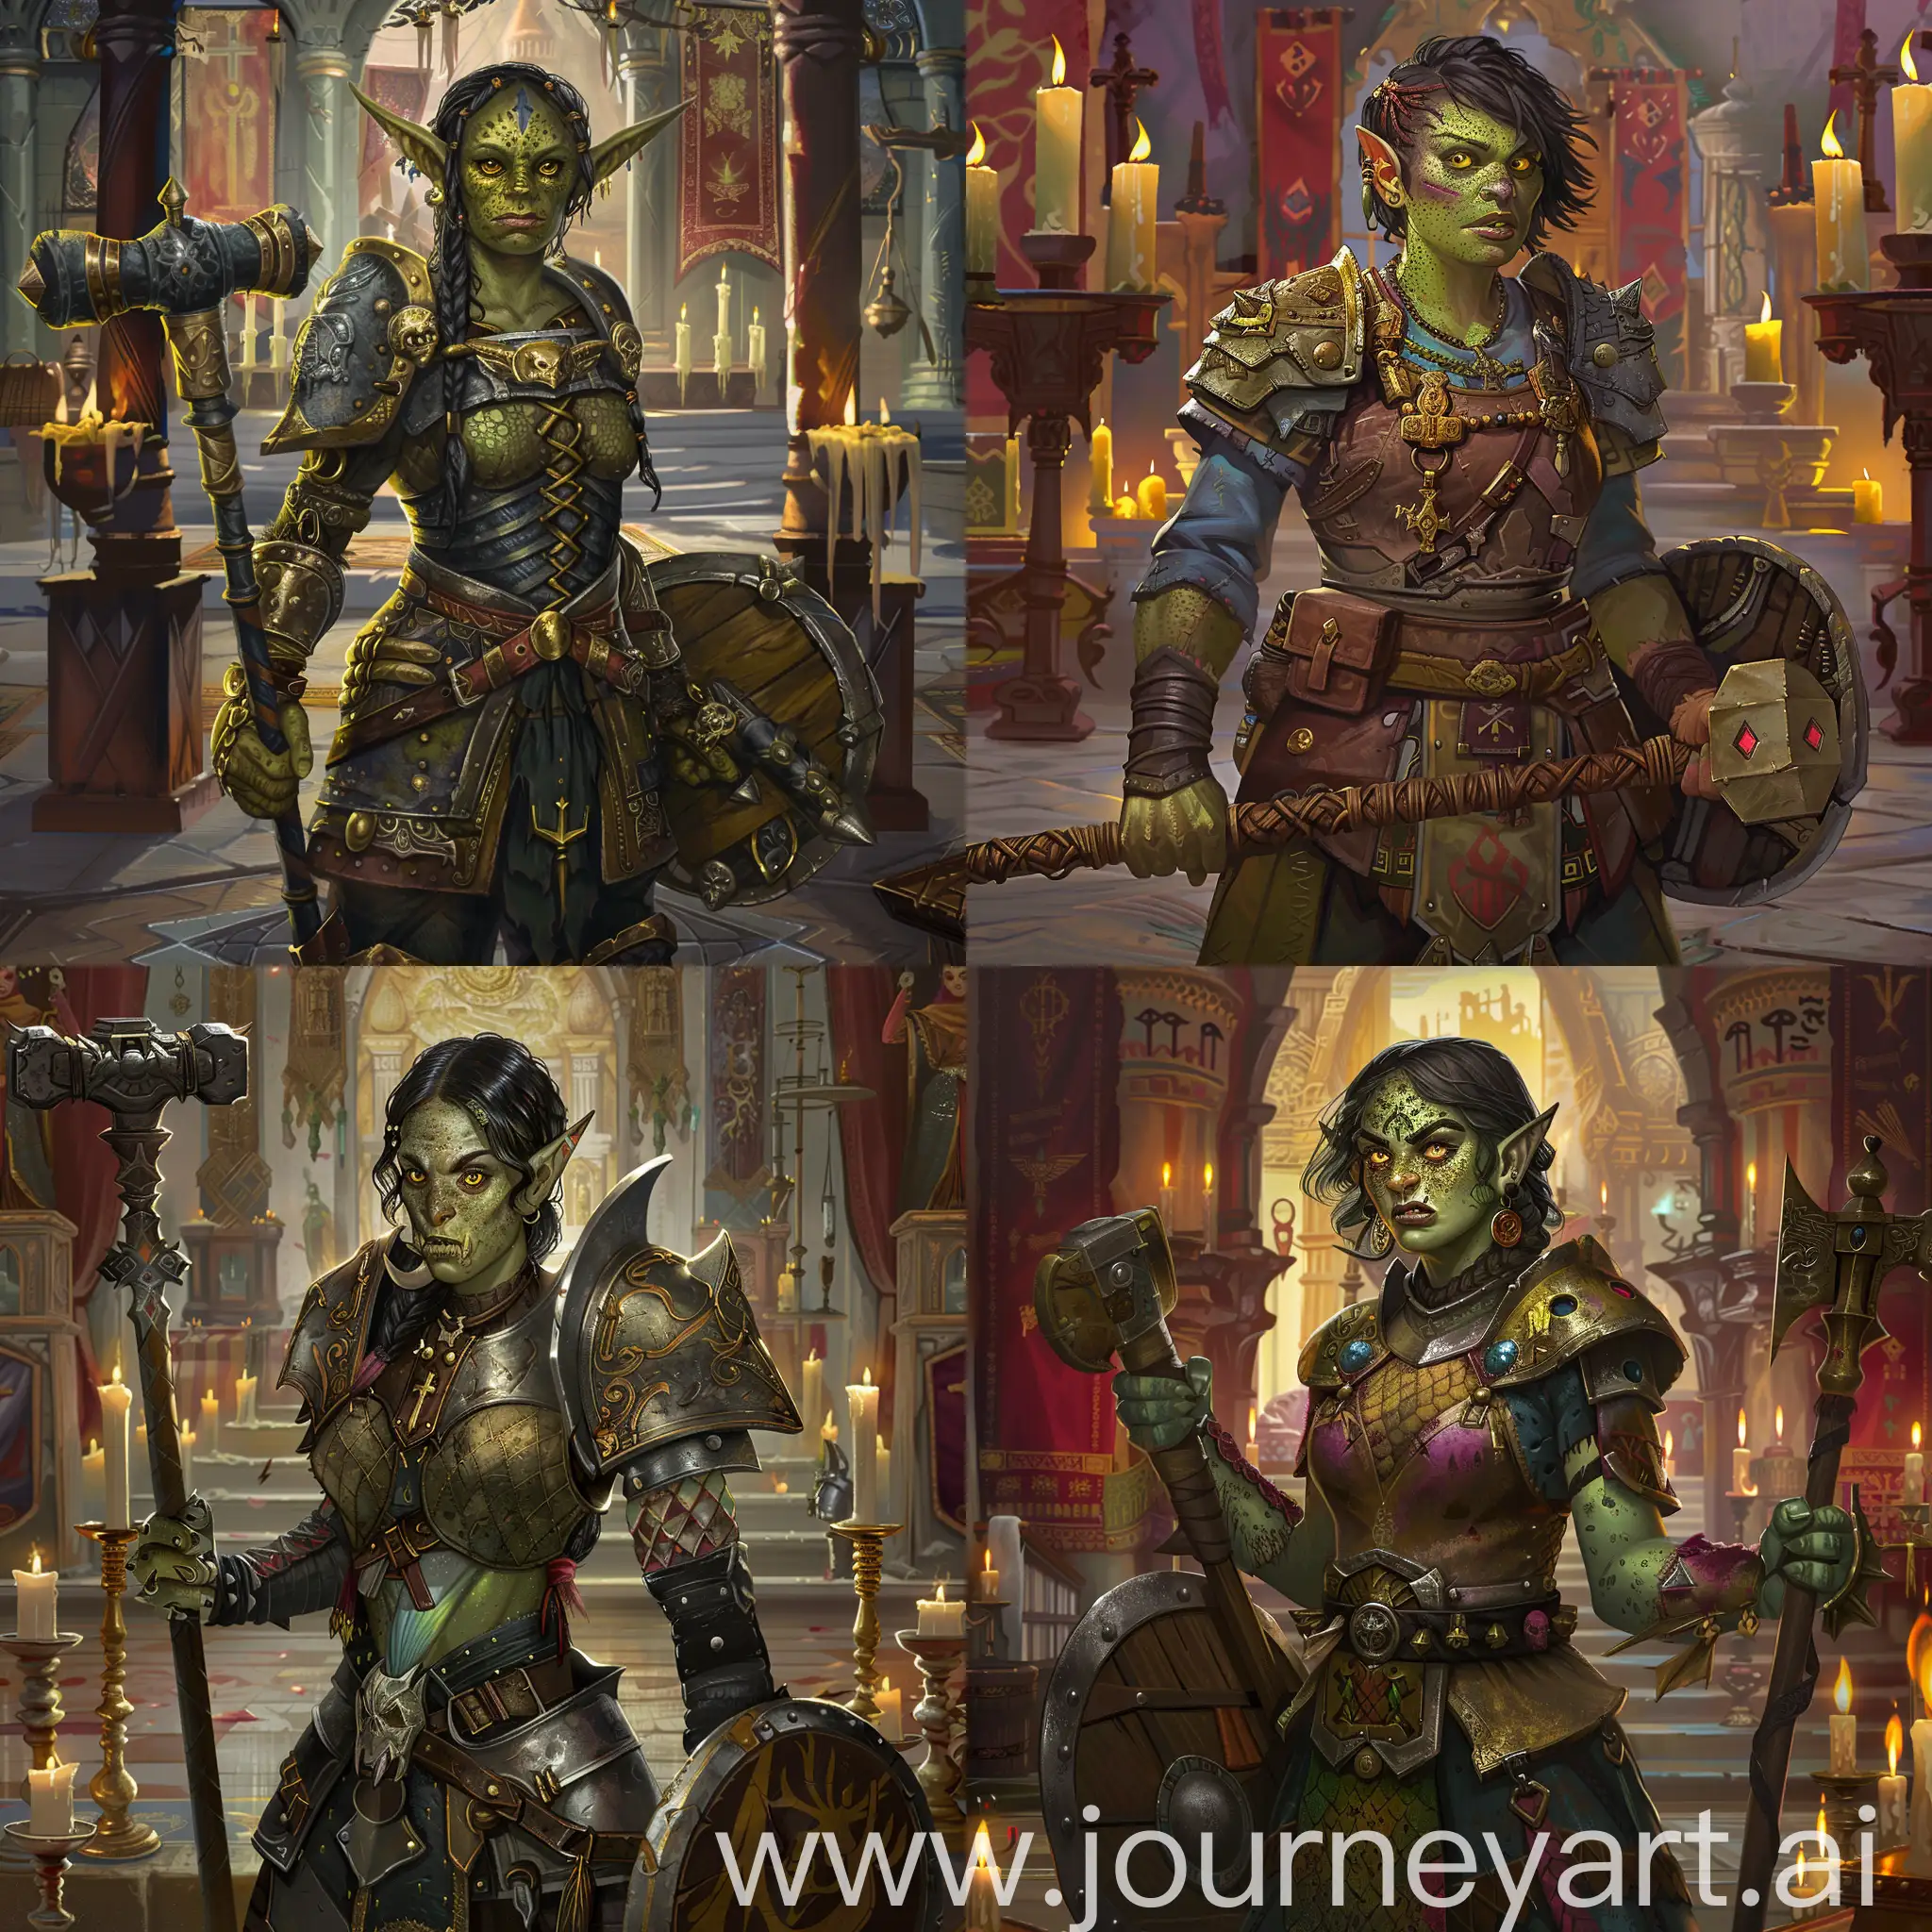 Female-Orc-Priest-Warrior-with-Mace-and-Shield-in-Medieval-Setting